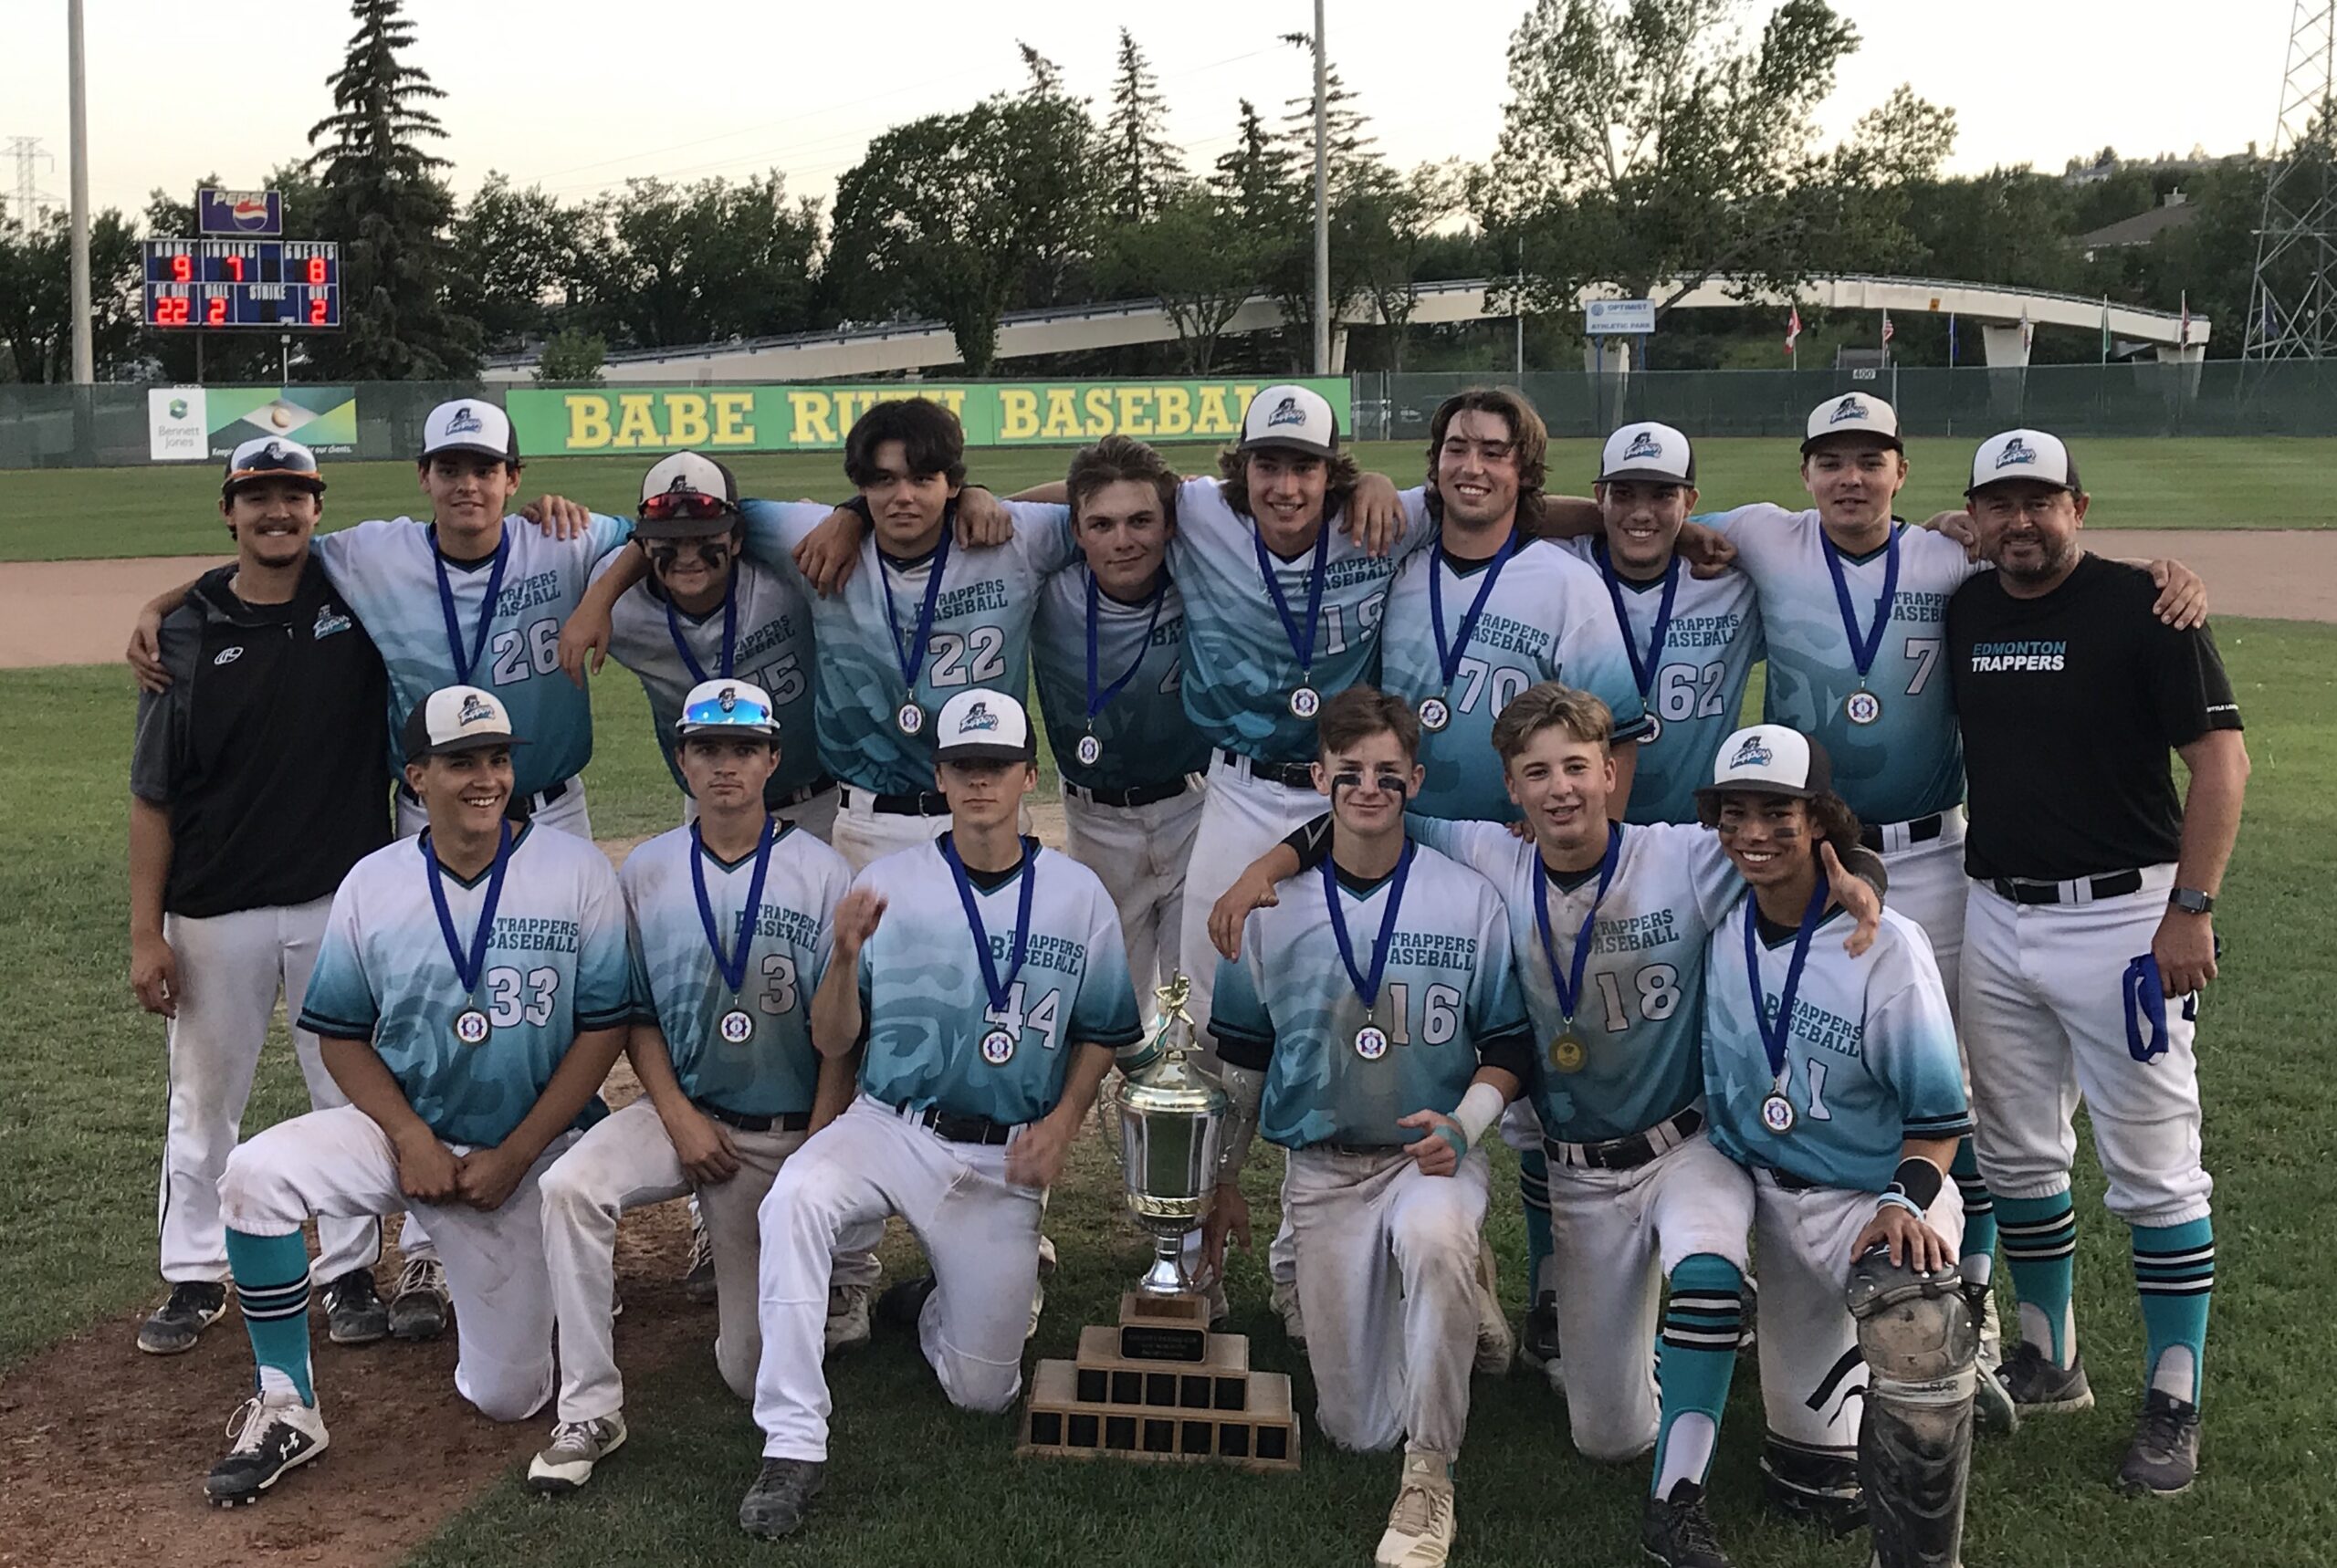 EDMONTON TRAPPERS 19U WINS THE CALGARY BABE RUTH AAA 2019 CHAMPIONSHIP